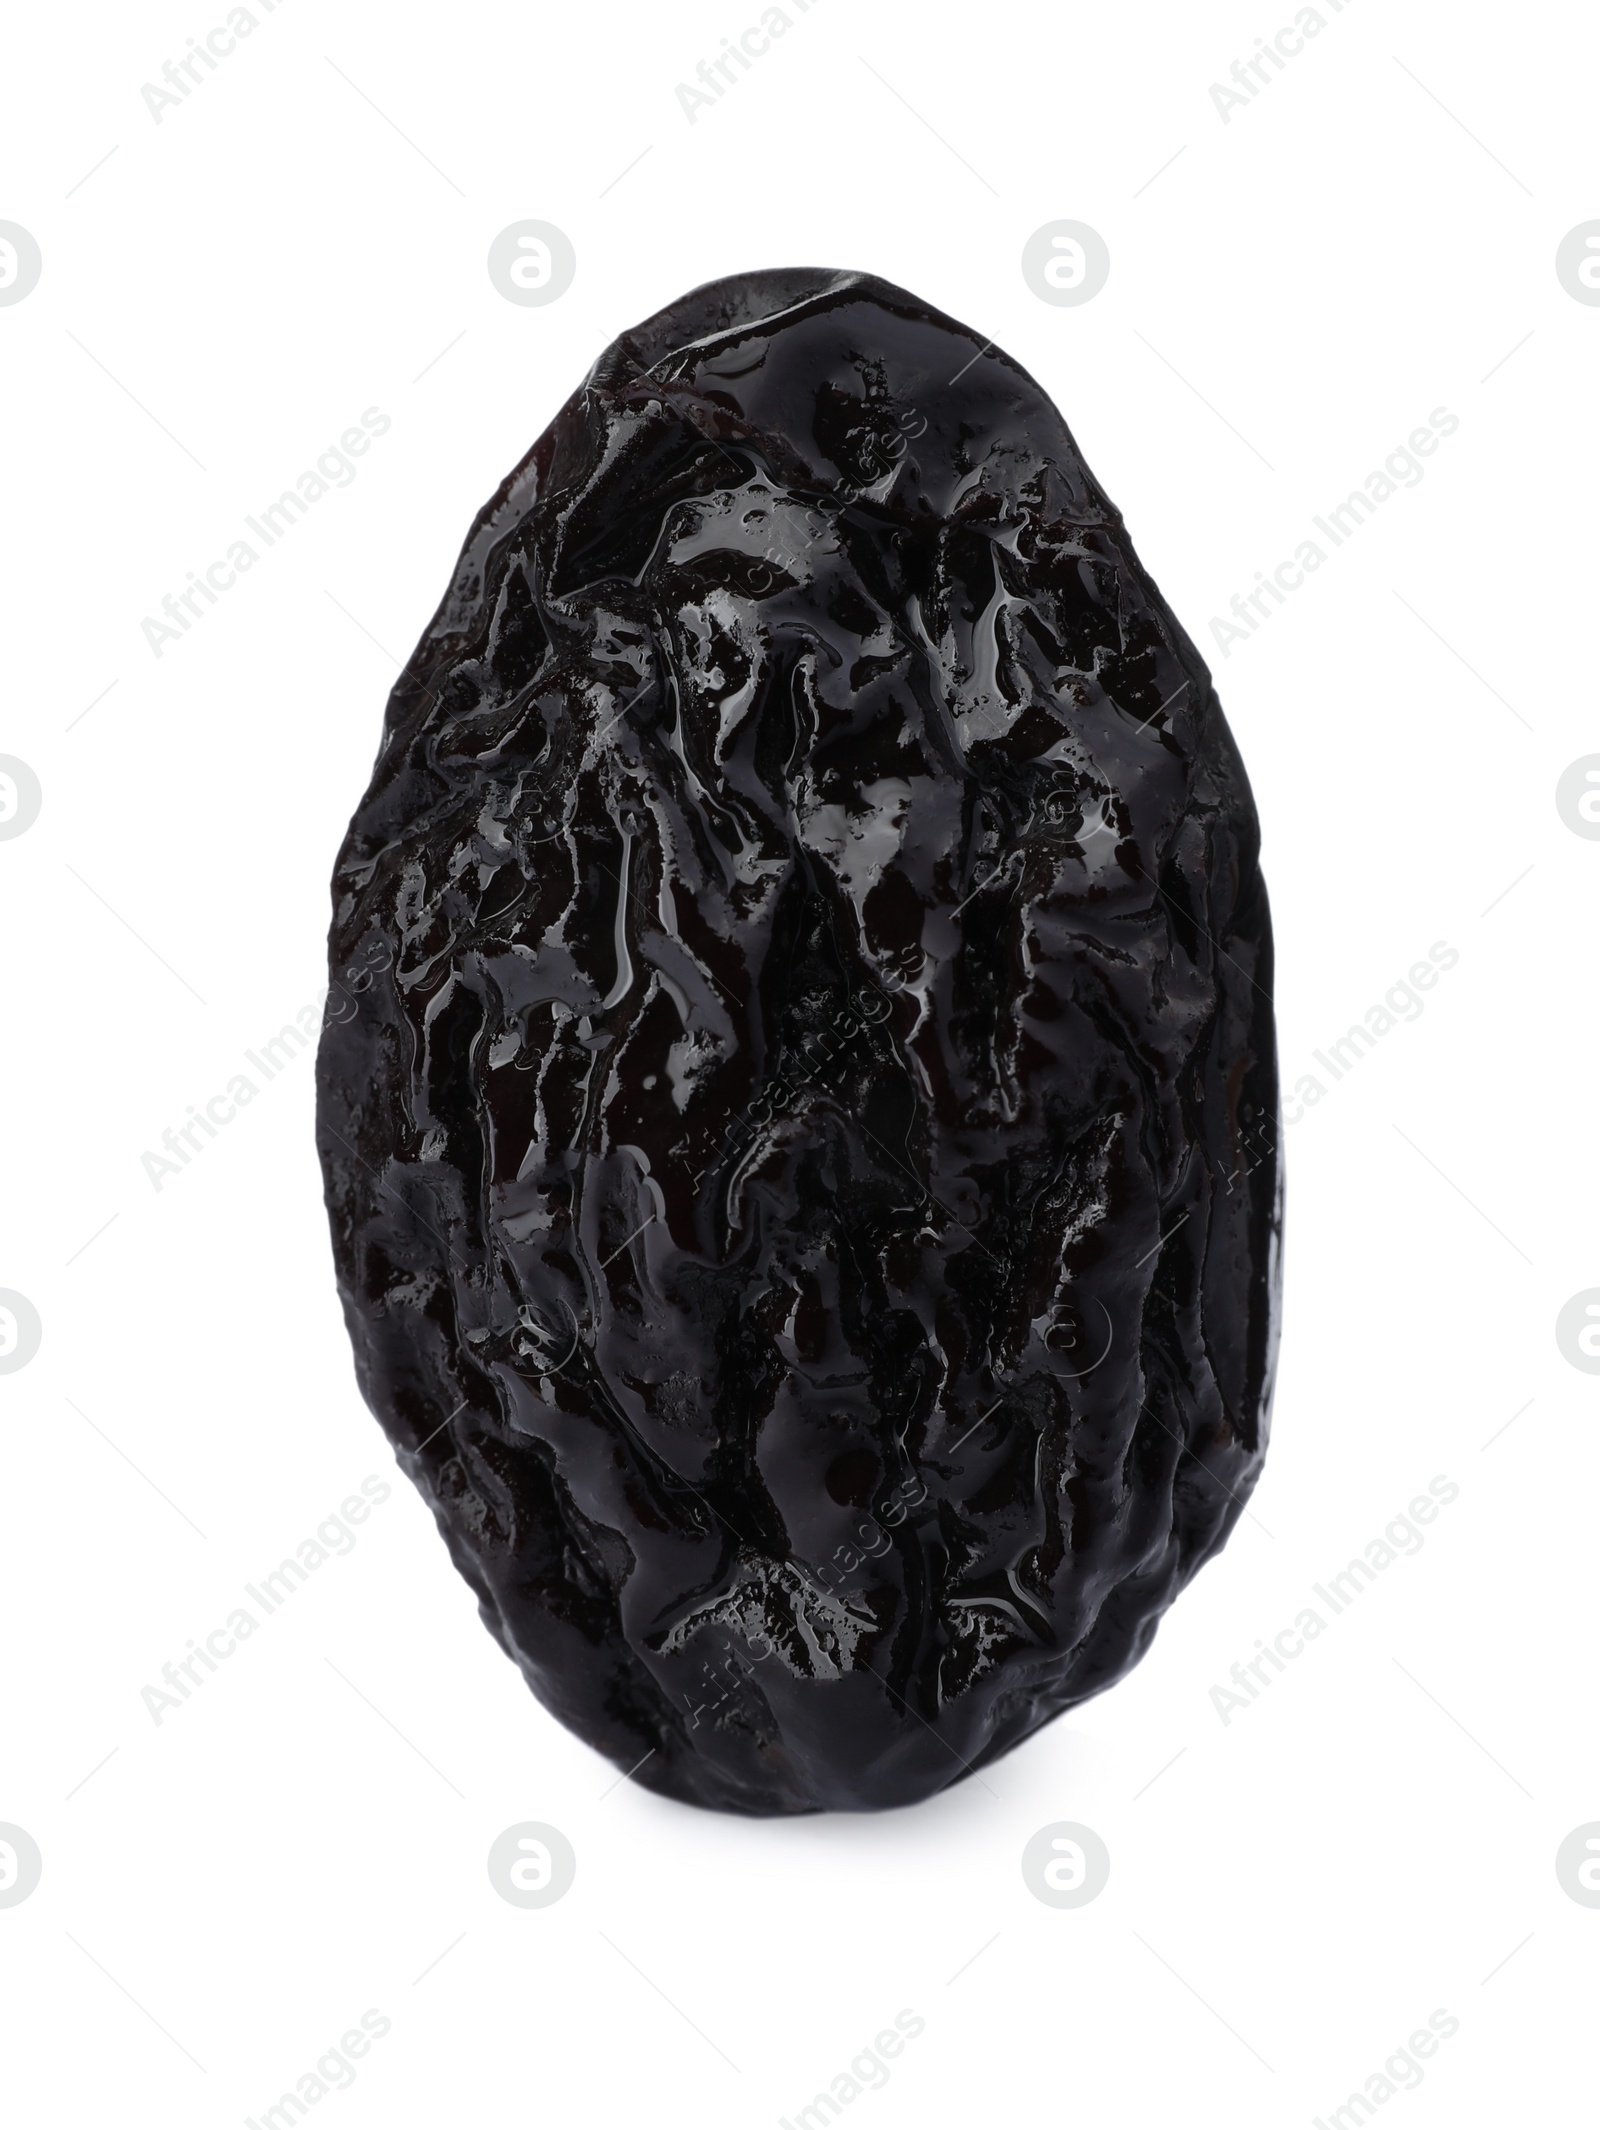 Photo of One sweet dried prune isolated on white